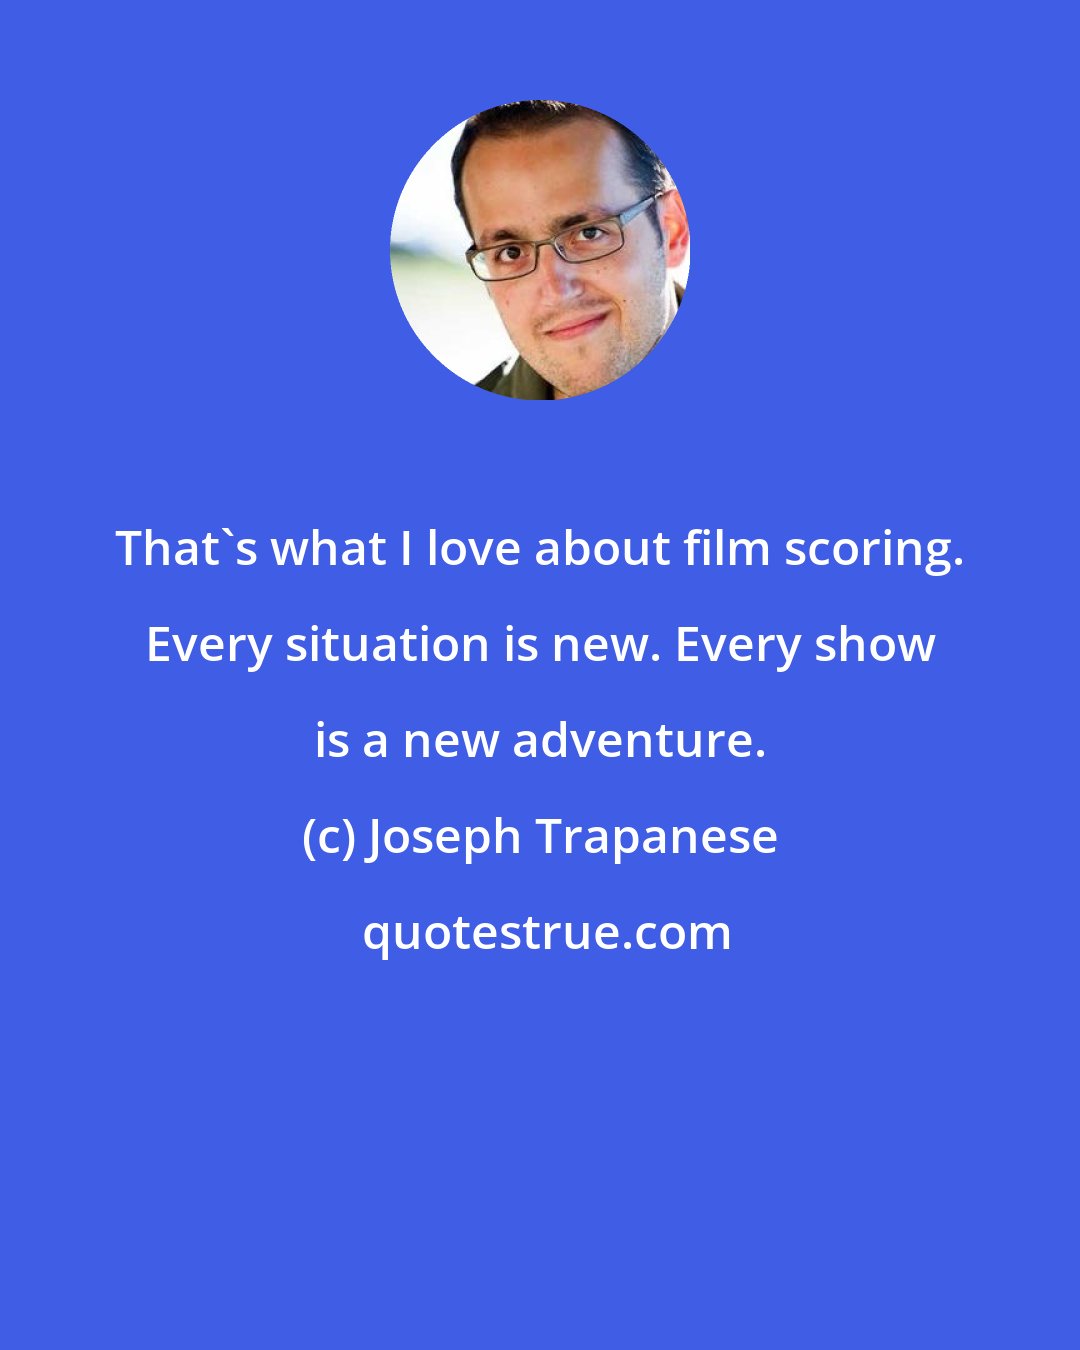 Joseph Trapanese: That's what I love about film scoring. Every situation is new. Every show is a new adventure.